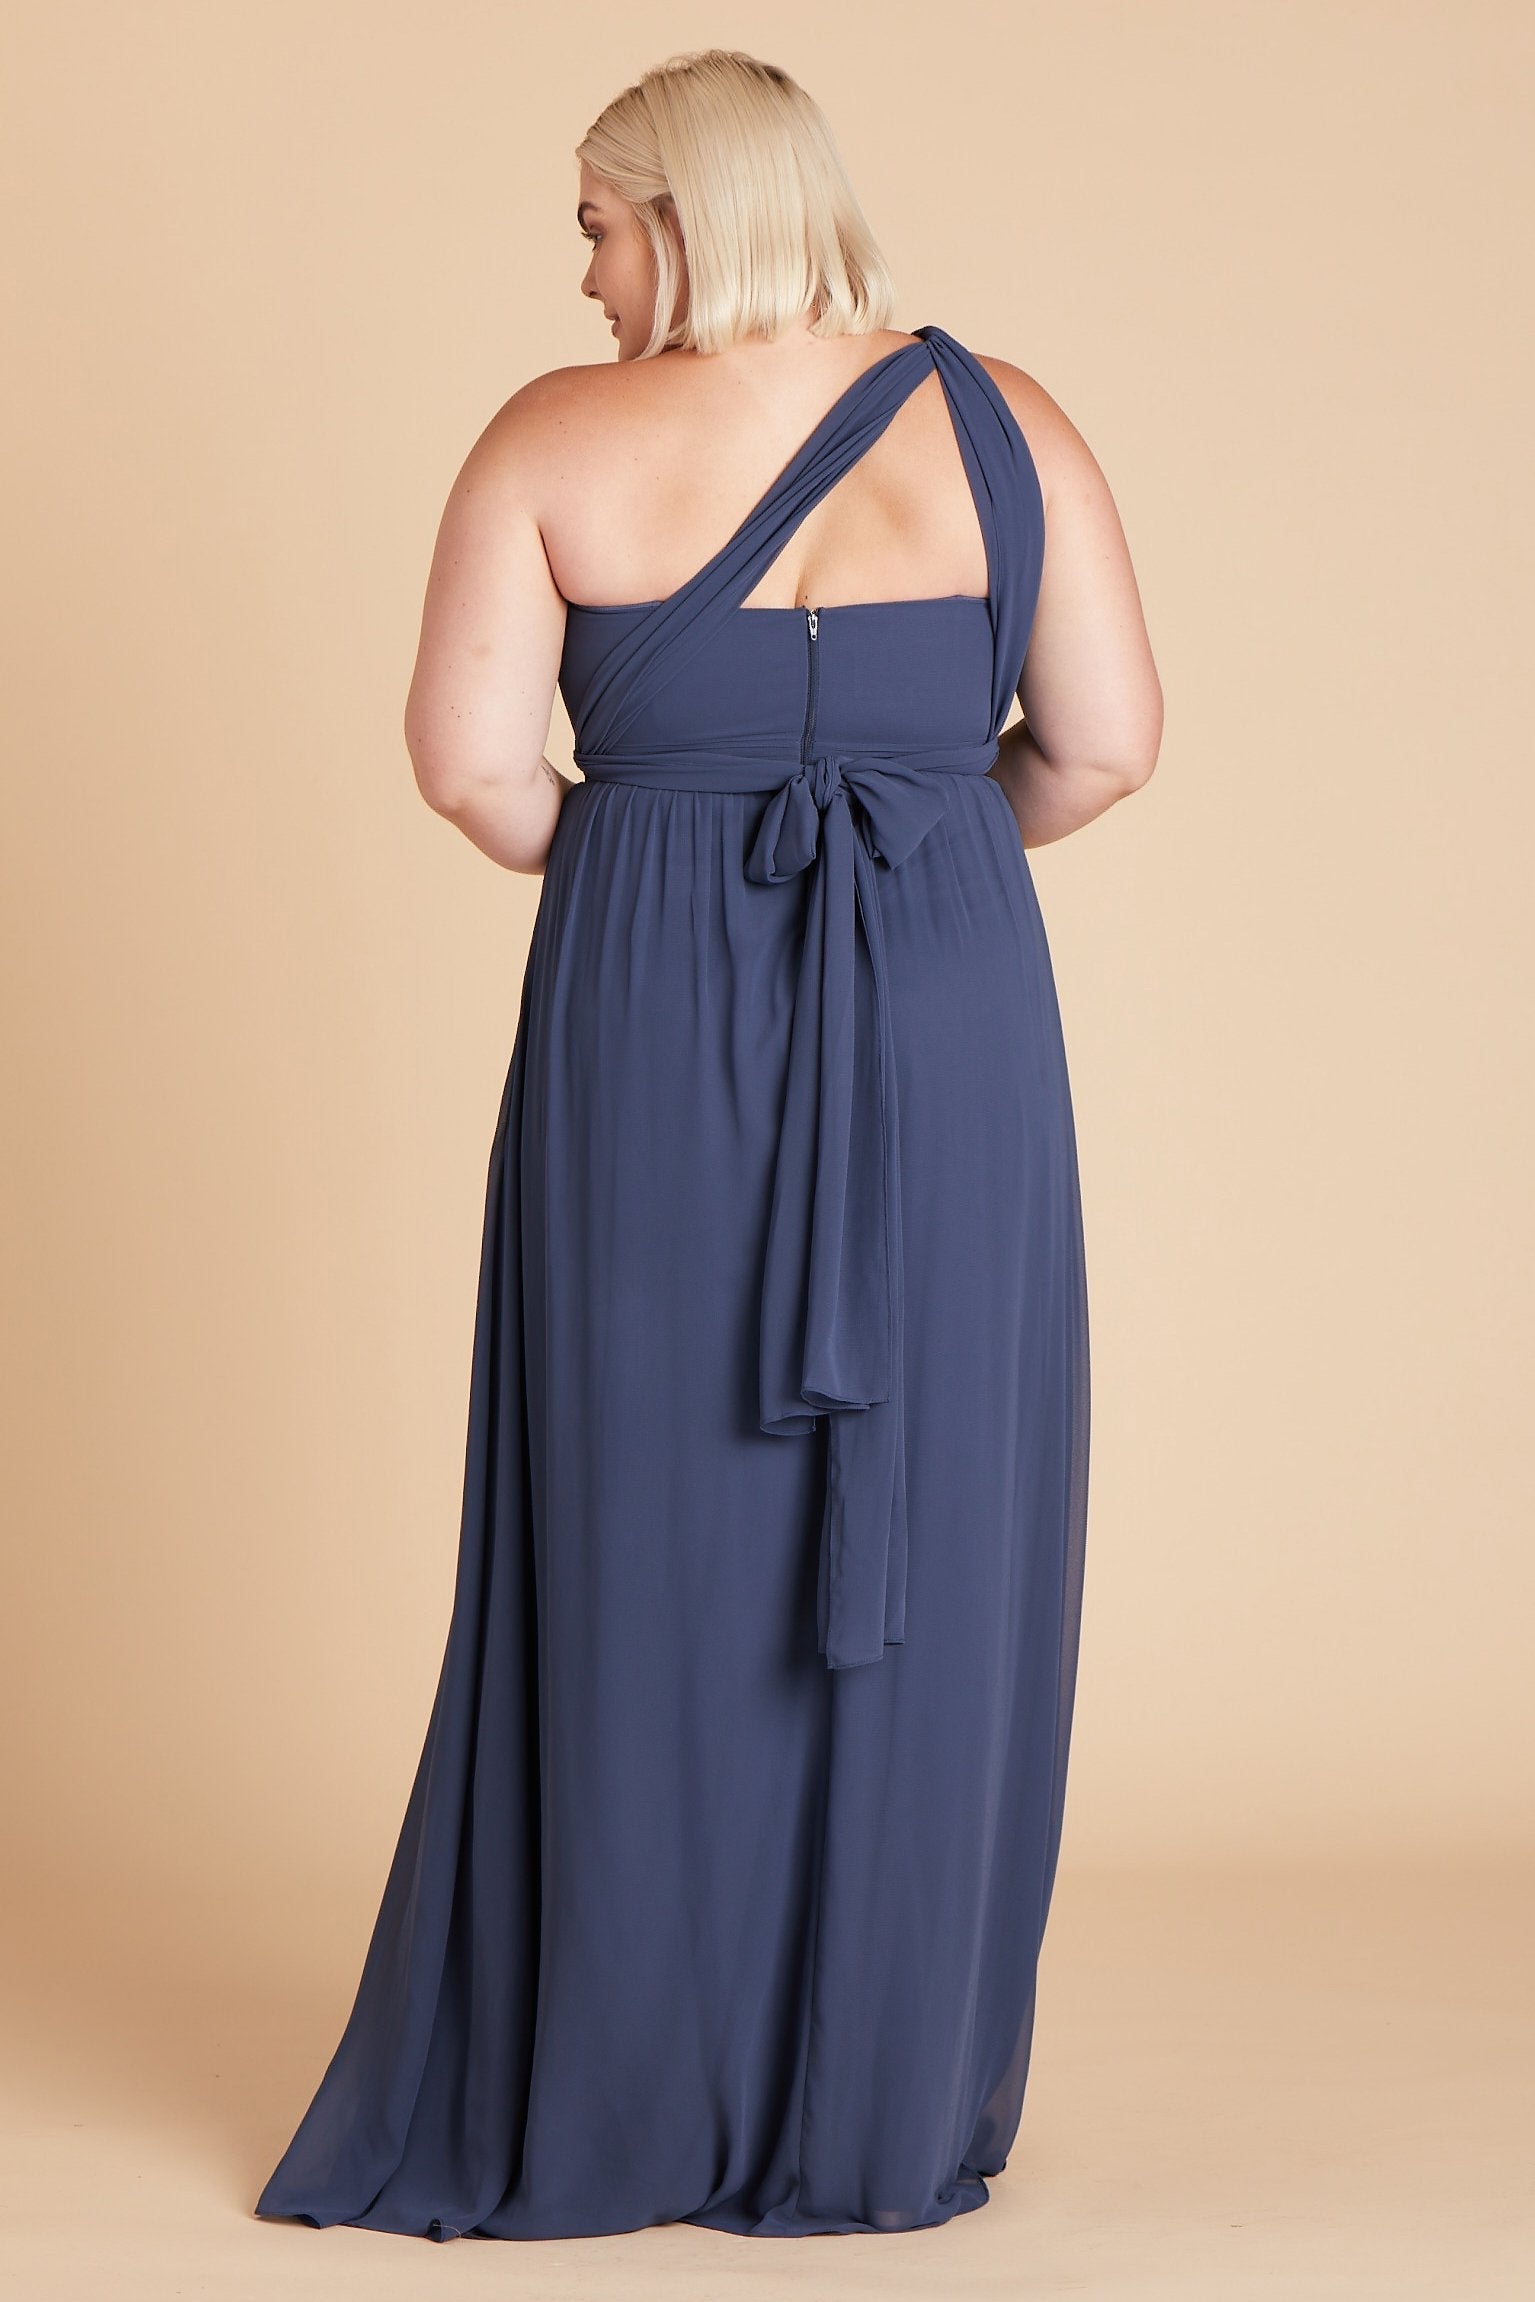 Grace convertible plus size bridesmaid dress in slate blue chiffon by Birdy Grey, back view